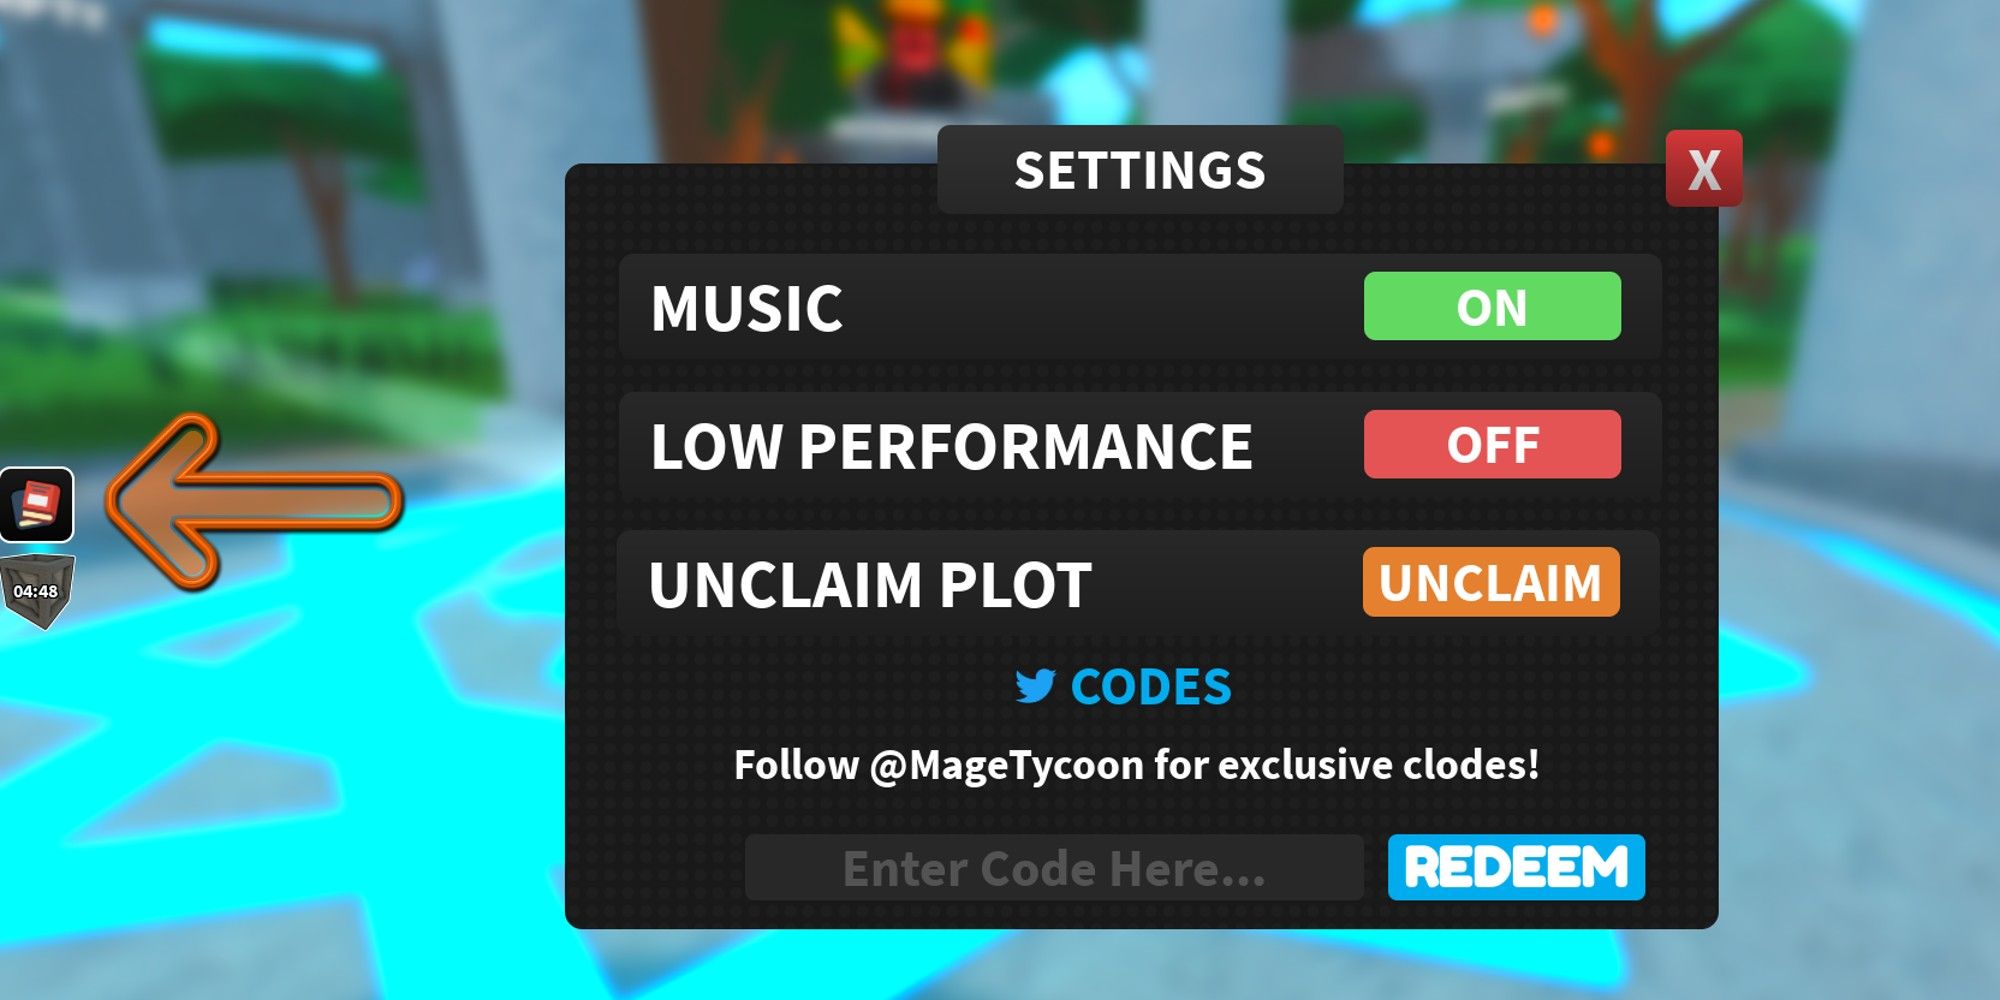 Where To Redeem Codes Mage Tycoon